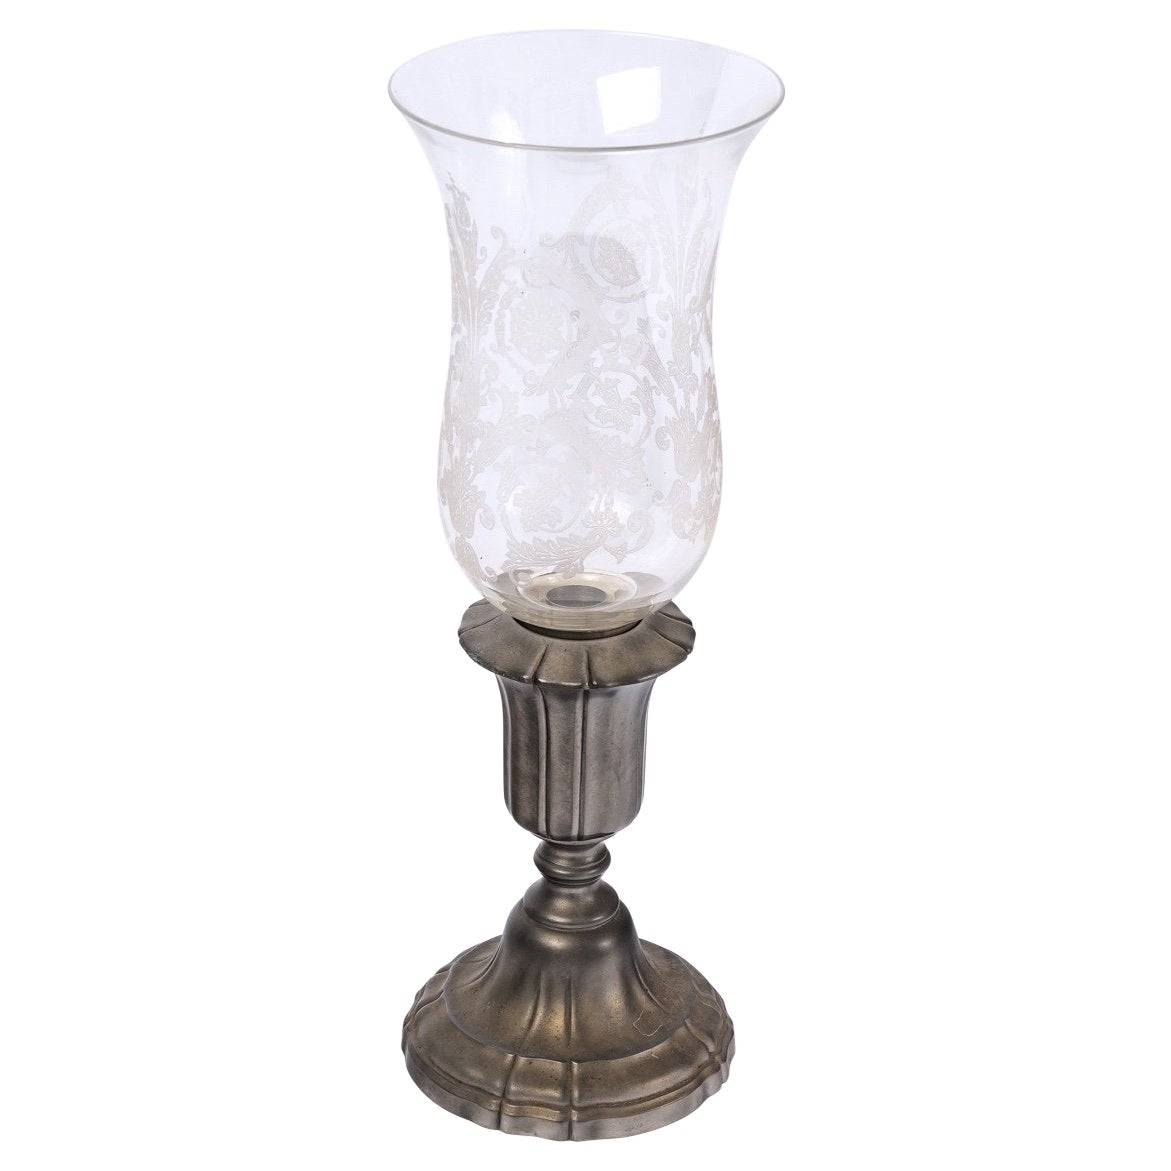 Tealight Candlestick Lamp - Baccarat Crystal And Pewter From The Manor - XX th For Sale